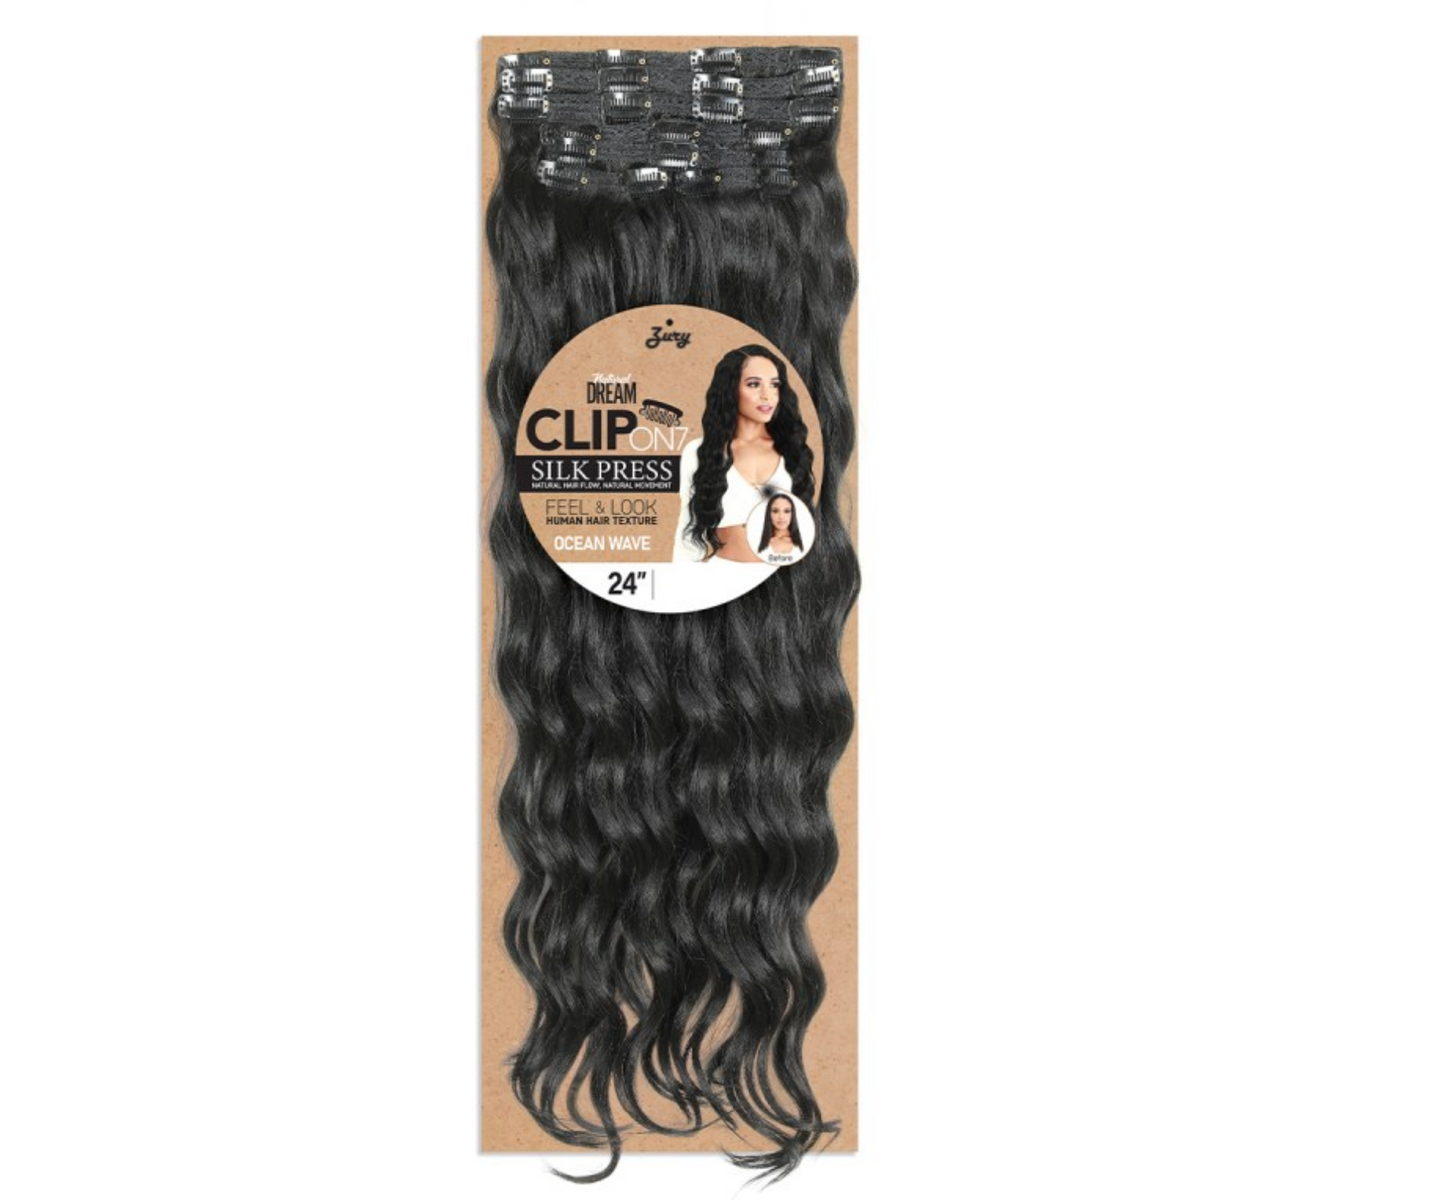 Zury Natural Dream Clip On Hair Extensions Ocean Wave 24”